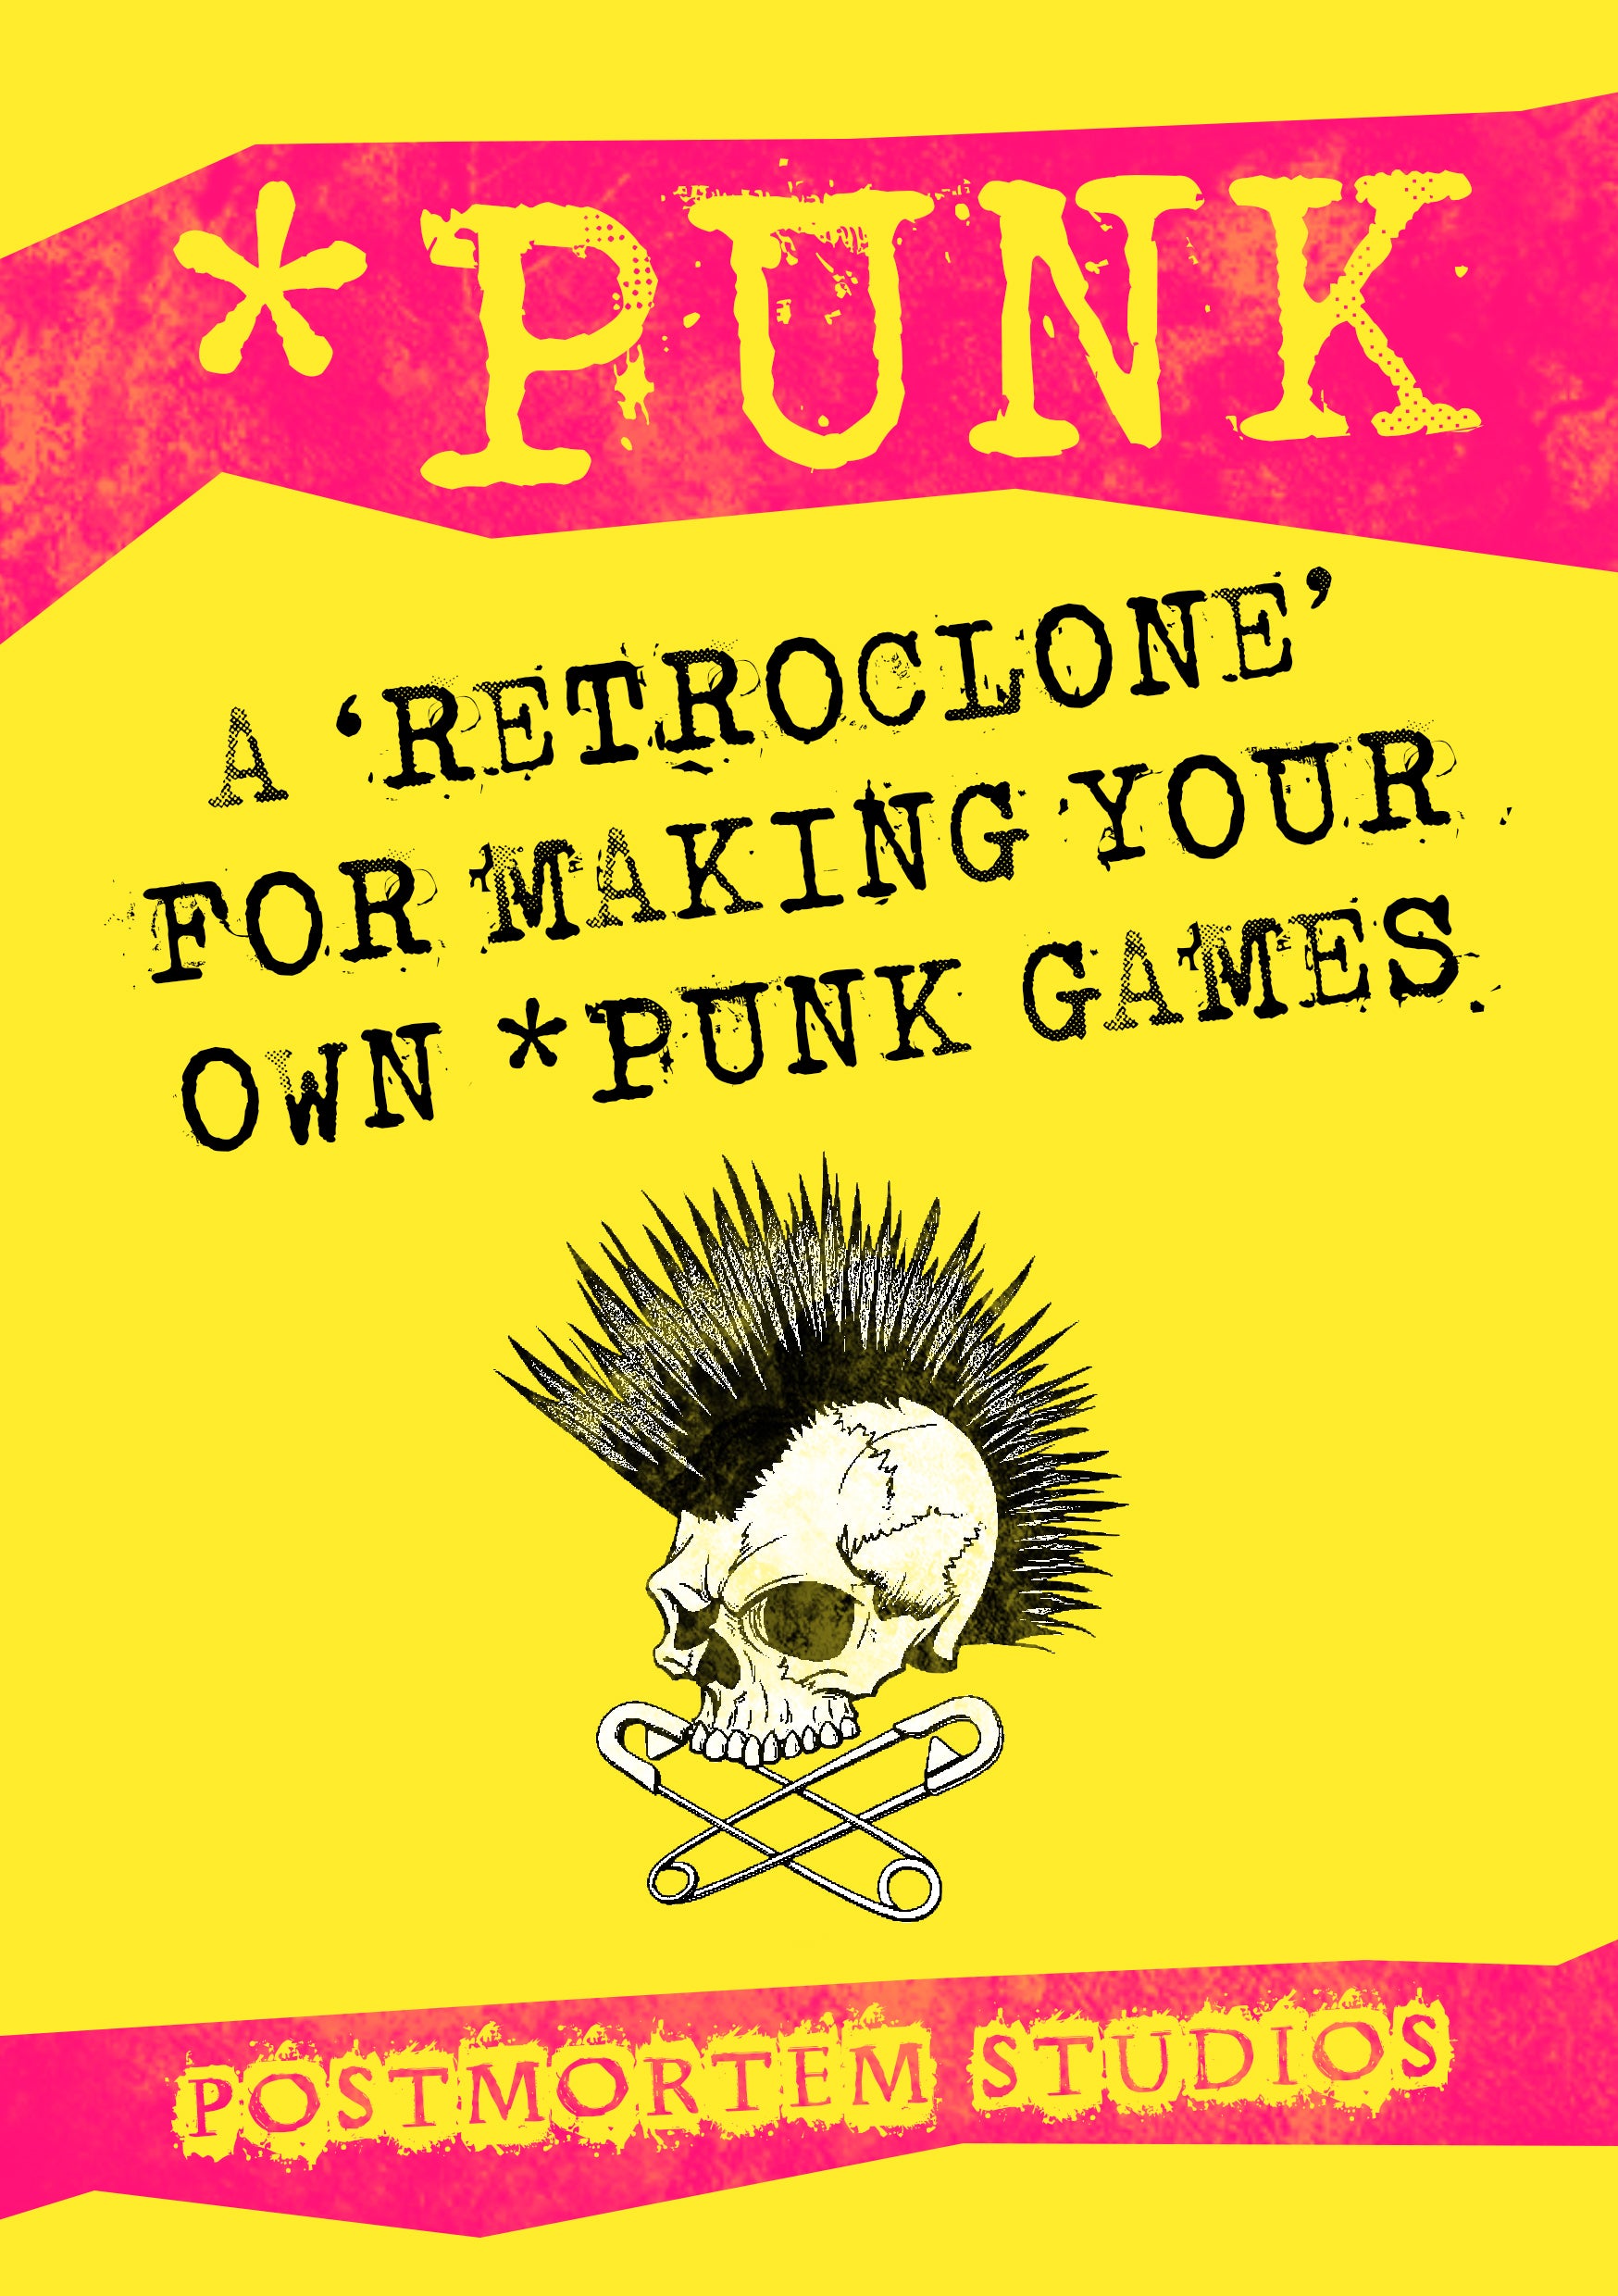 Punk - A Retroclone RPG System for Making Your own *Punk Games